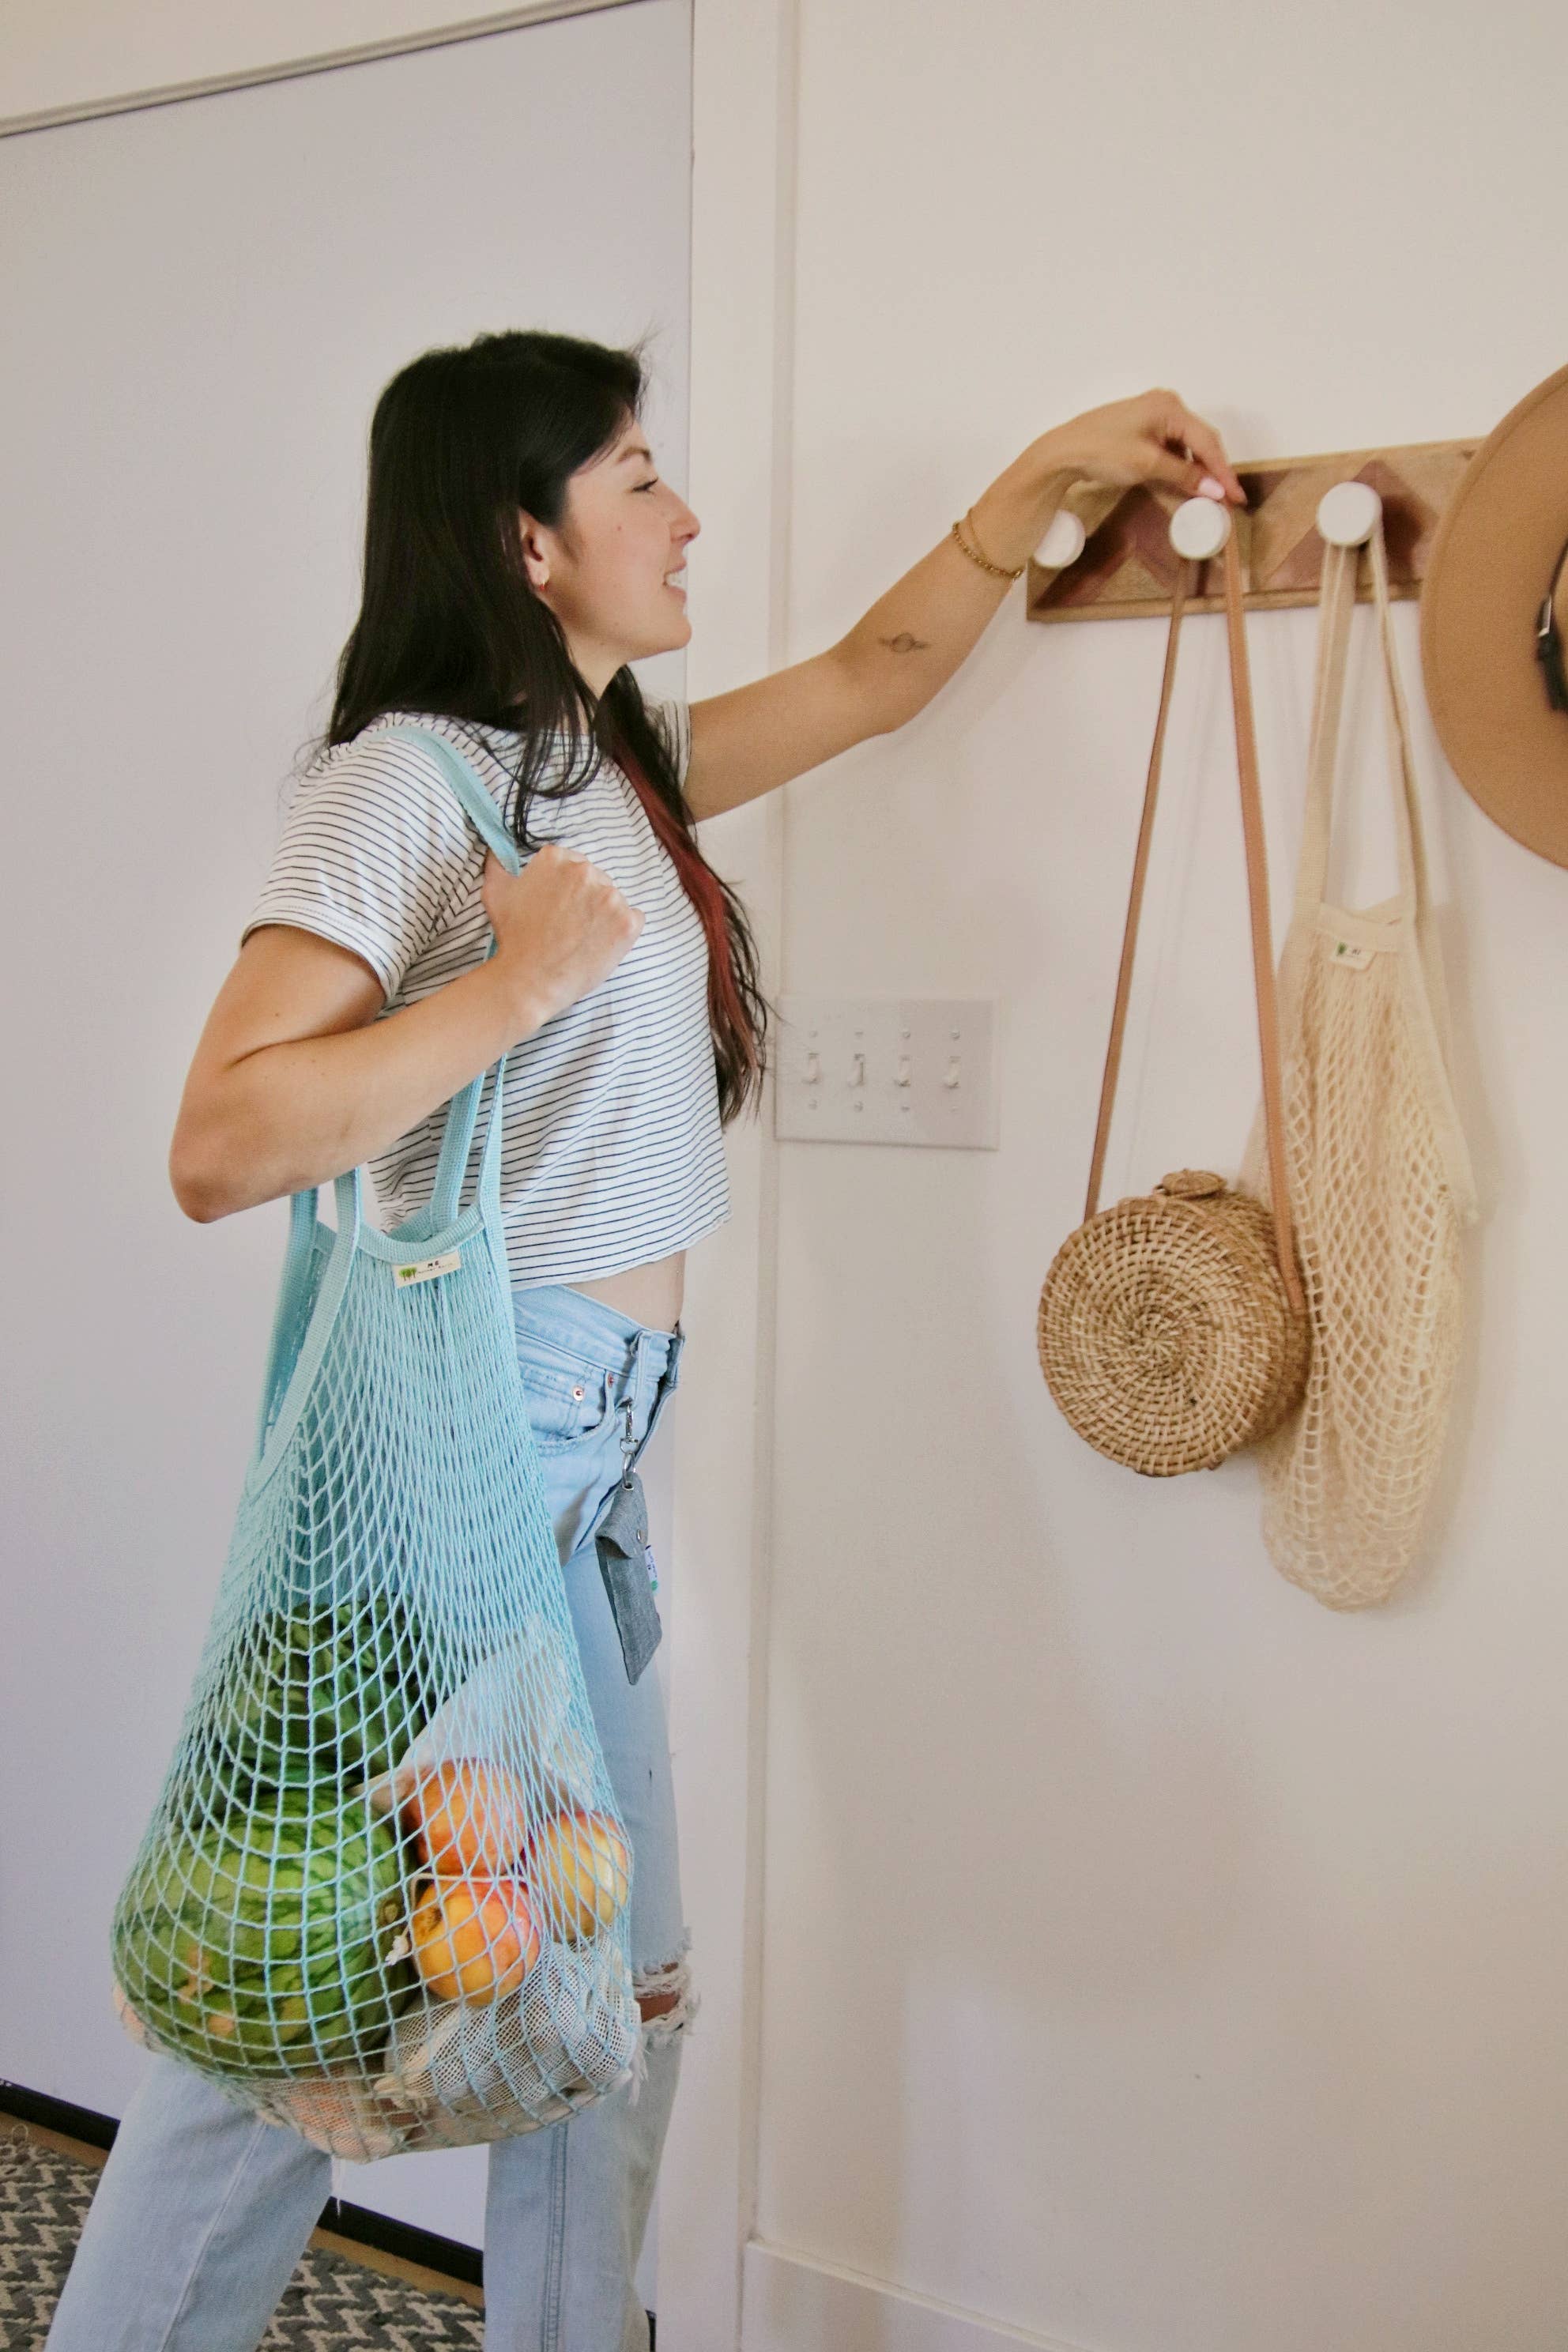 Me Mother Earth - The "One Tripper" HUGE Mesh Market Bag | Zero Waste: Natural